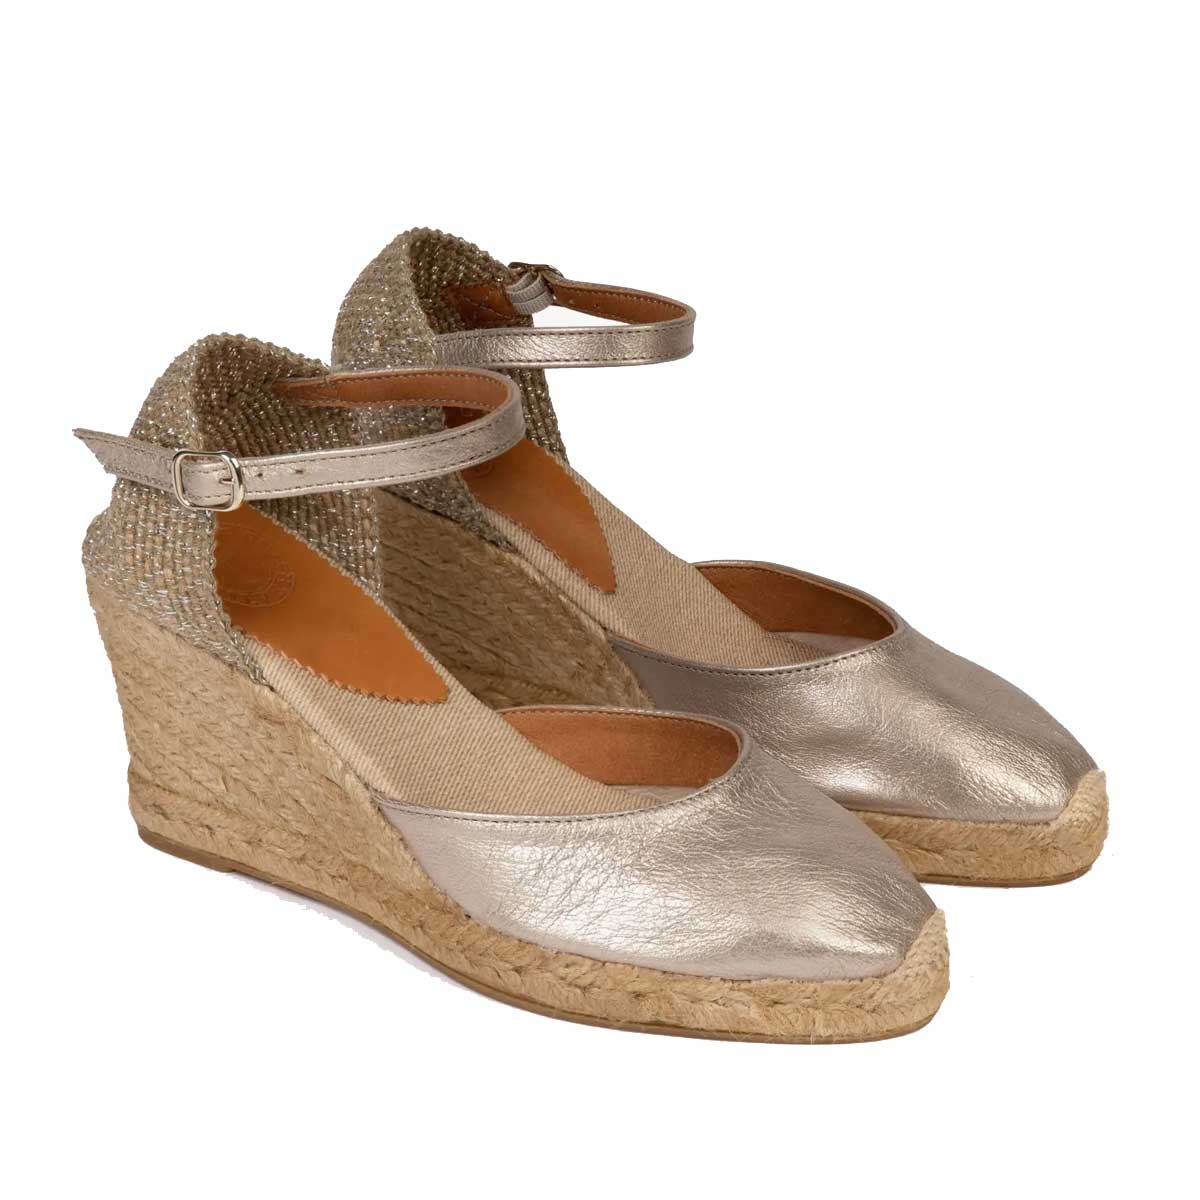 Penelope Chilvers High Mary Jane Metallic Leather Espadrille - Women's -  Champagne